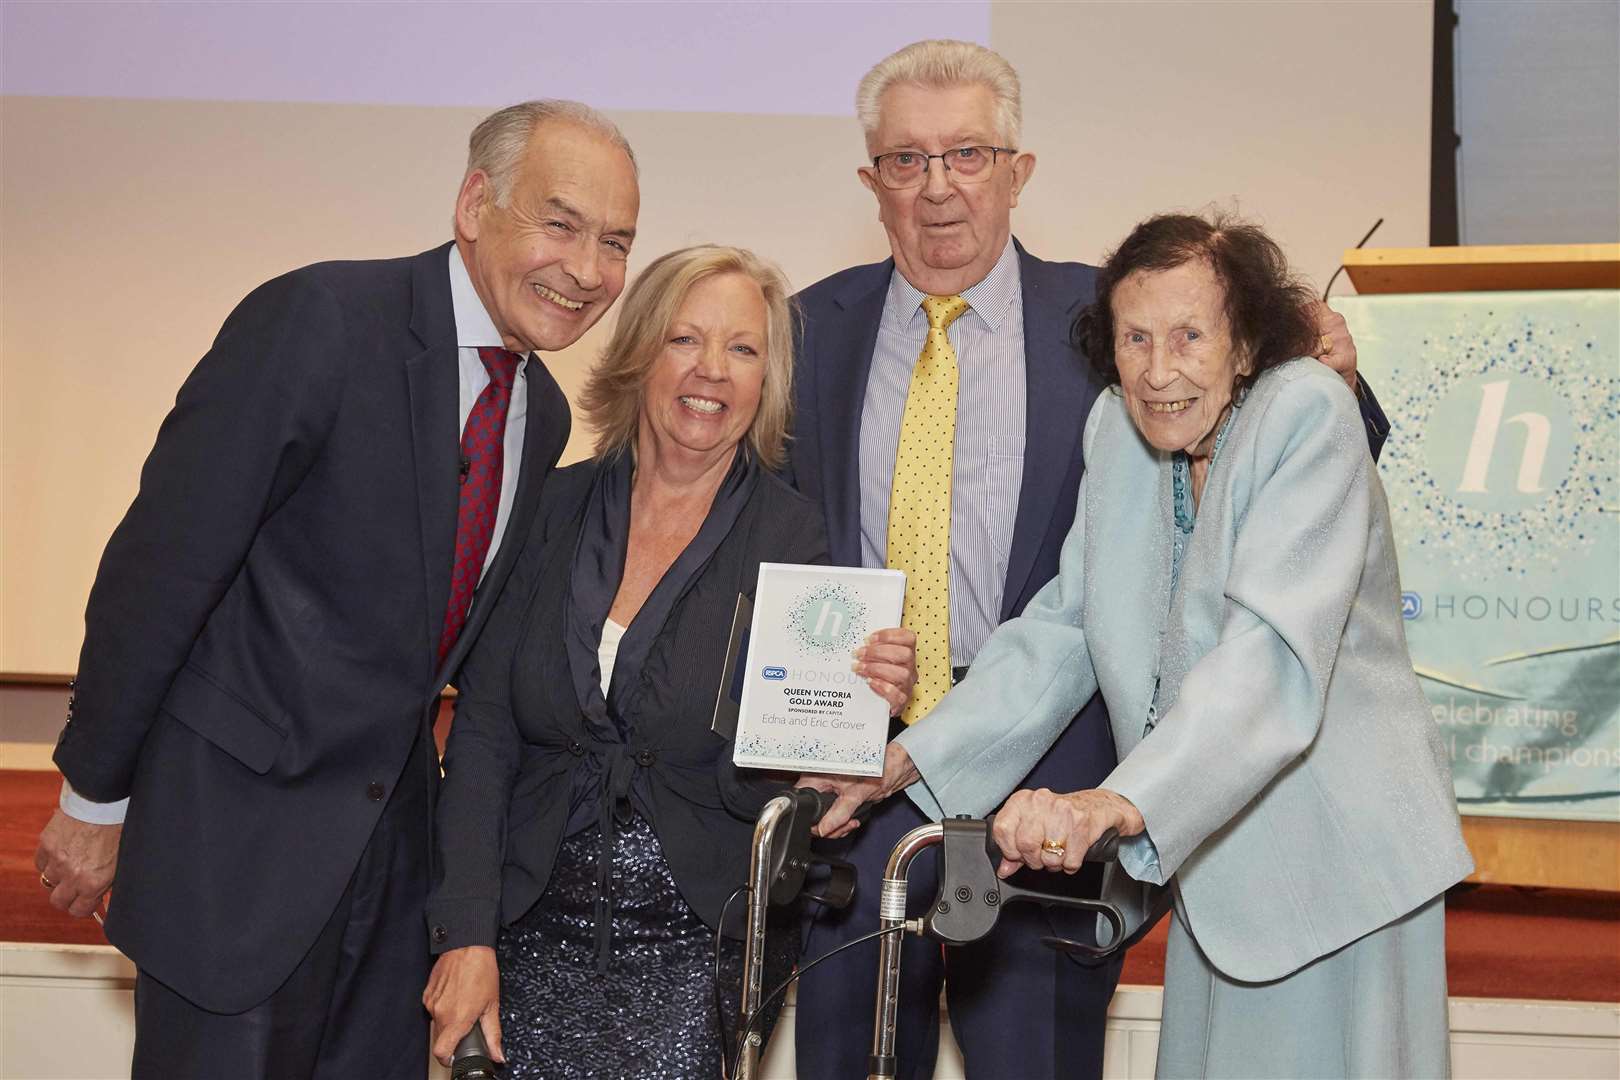 Edna and Eric Grover, from Dartford, were honoured at the awards